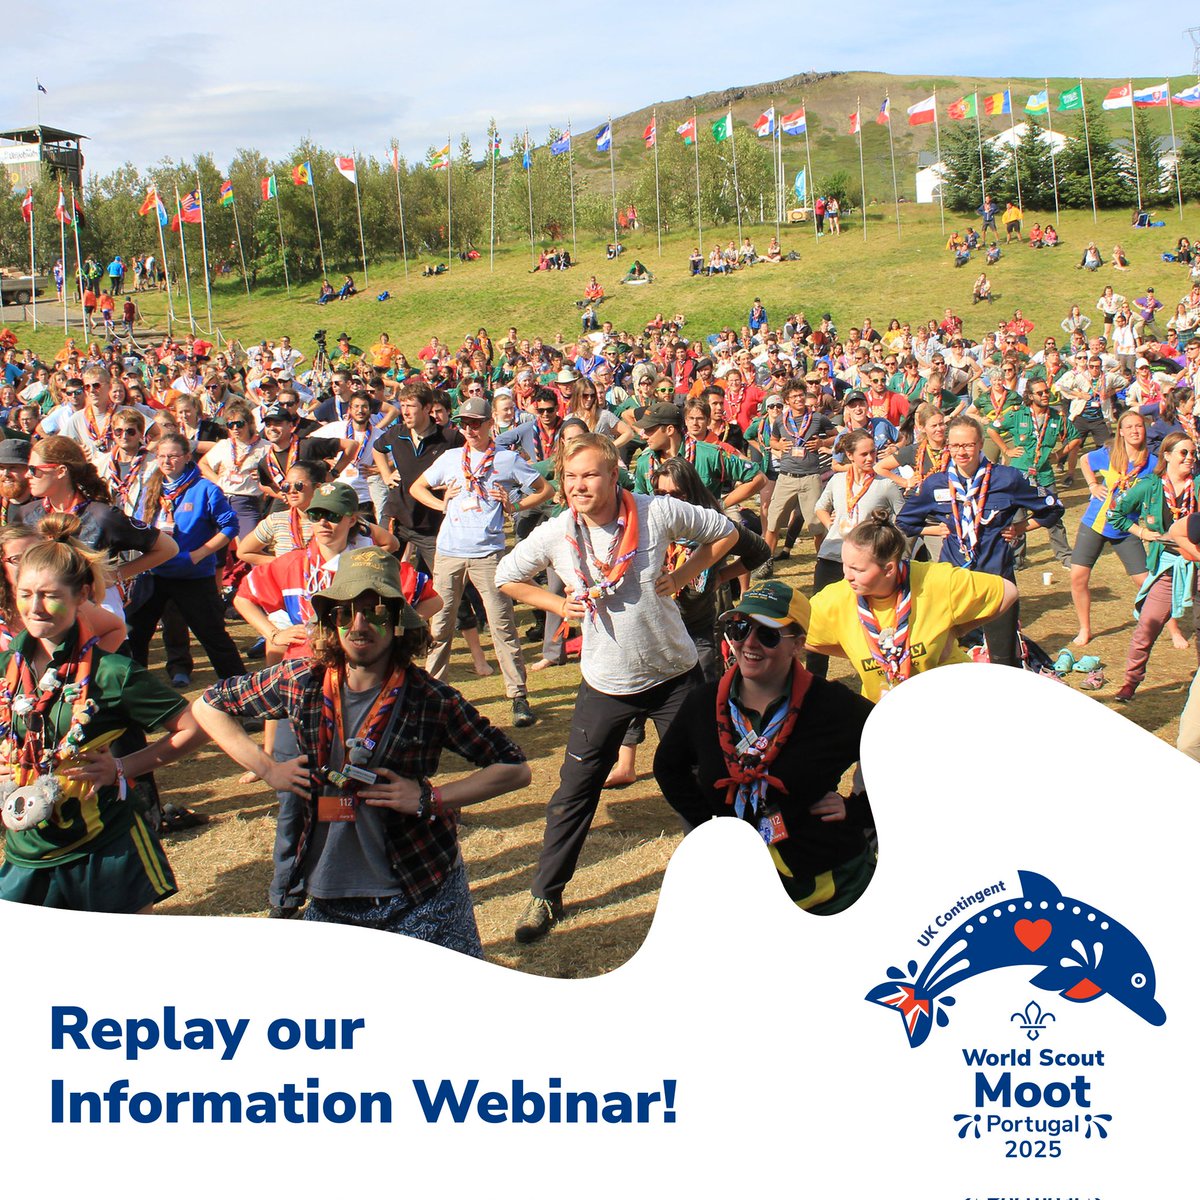 Did you miss our #MootUK Information Webinar on Monday evening? Don't worry! You can now watch the replay and view the slides by diving over to our website at scouts.org.uk/moot 🐬 And don't forget, applications are now open until Monday 1 April 2024 🇵🇹